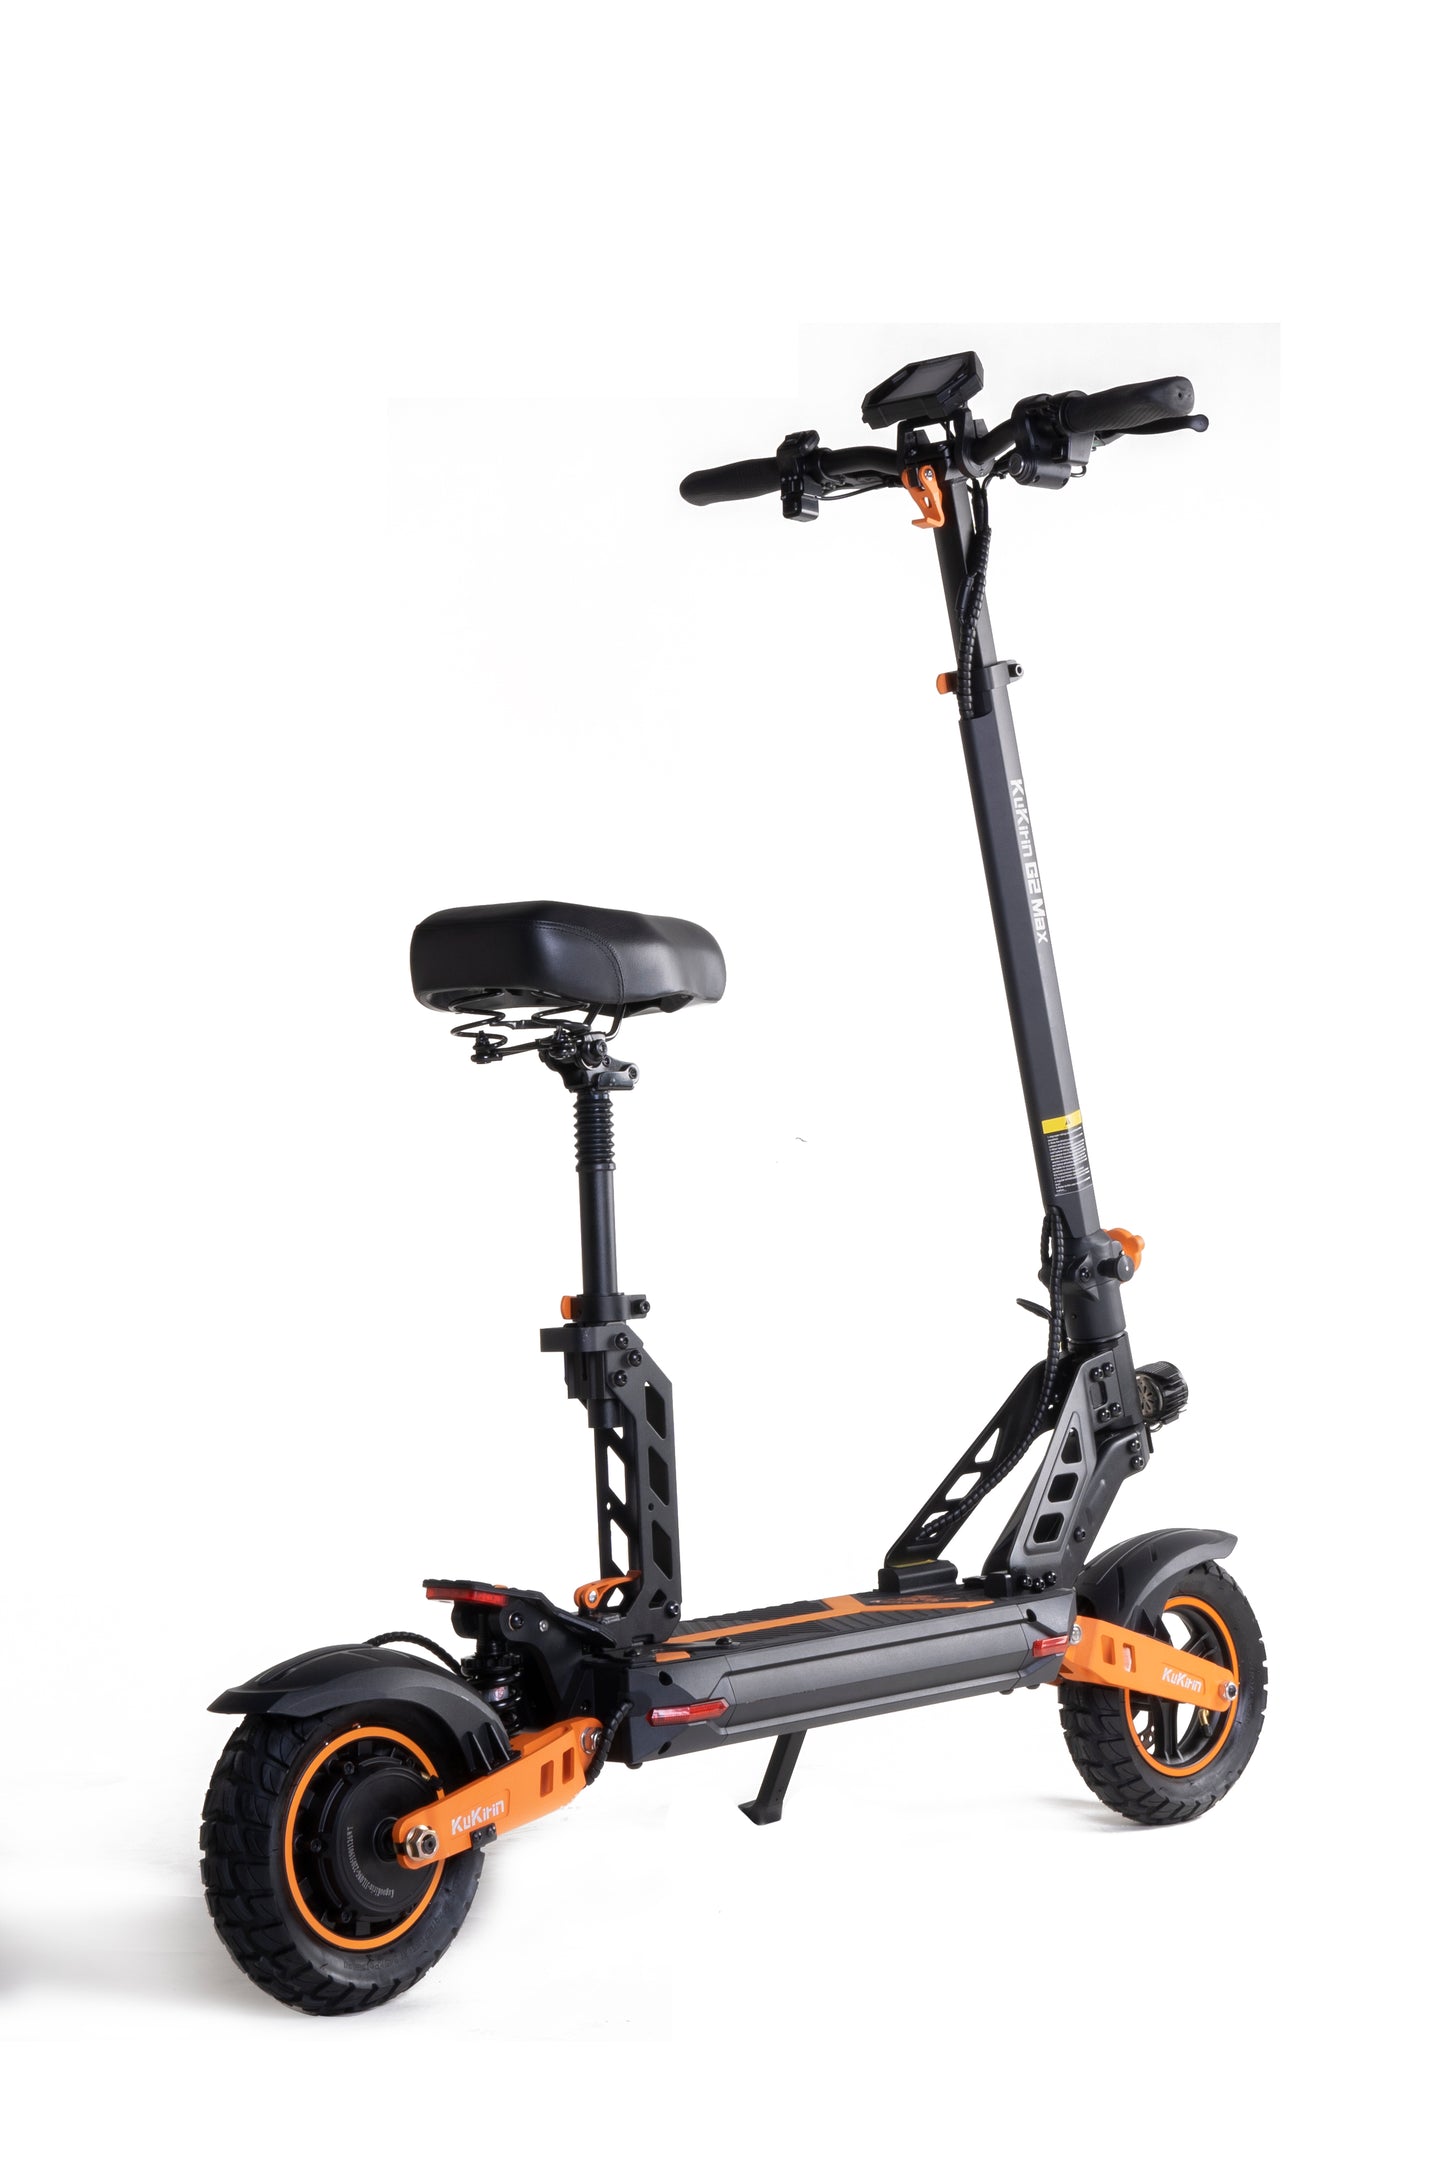 KUKIRIN G2 Max Electric Scooter | 960WH Power | 1000W Motor